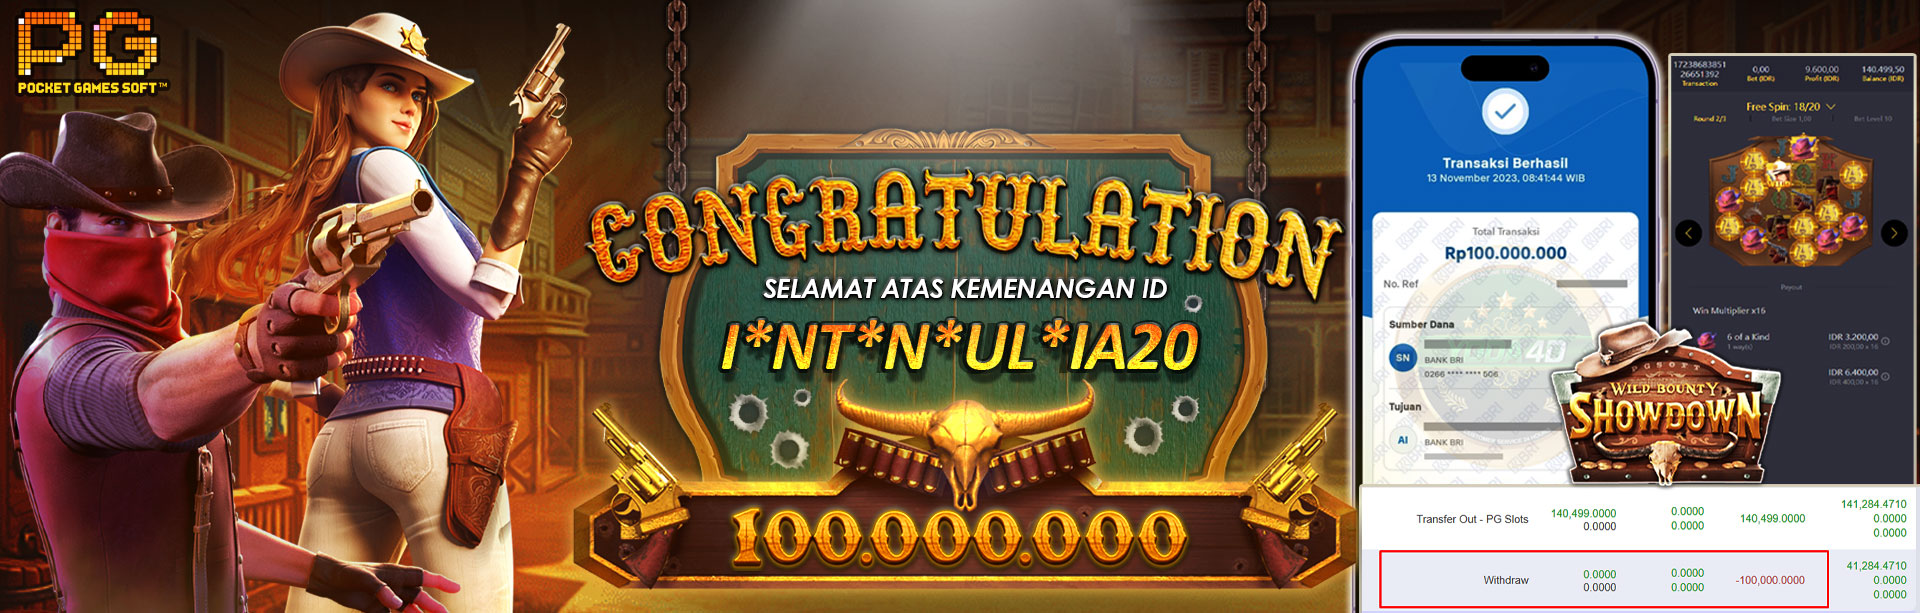 WITHDRAW 100JT